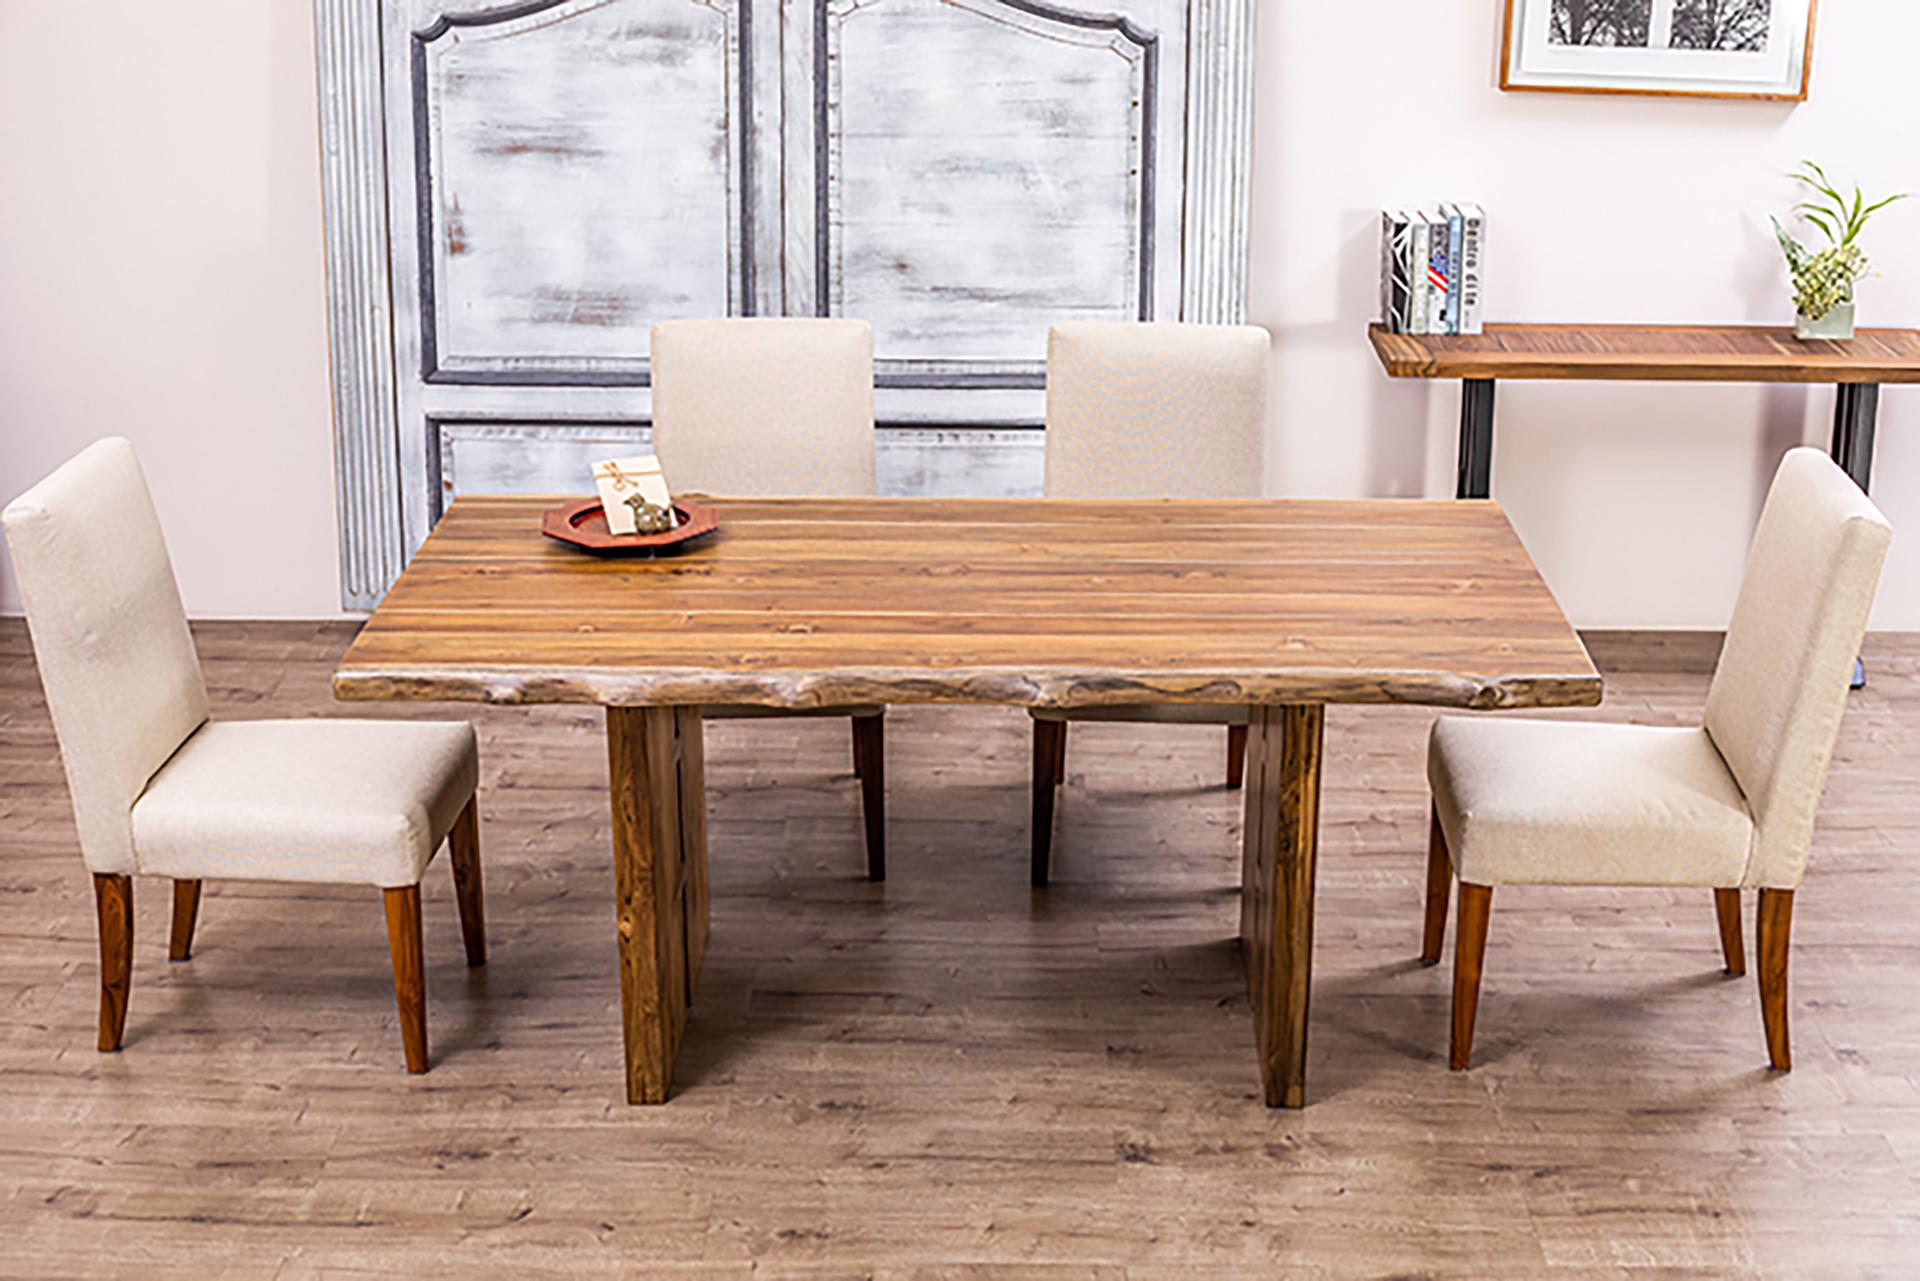 A gorgeous dining table that provides a lovely foundation for family dinners. Using century-old joinery techniques, the 100% solid natural wood table provides a focal piece that can be handed down for generations.
The Table Company makes only 100%